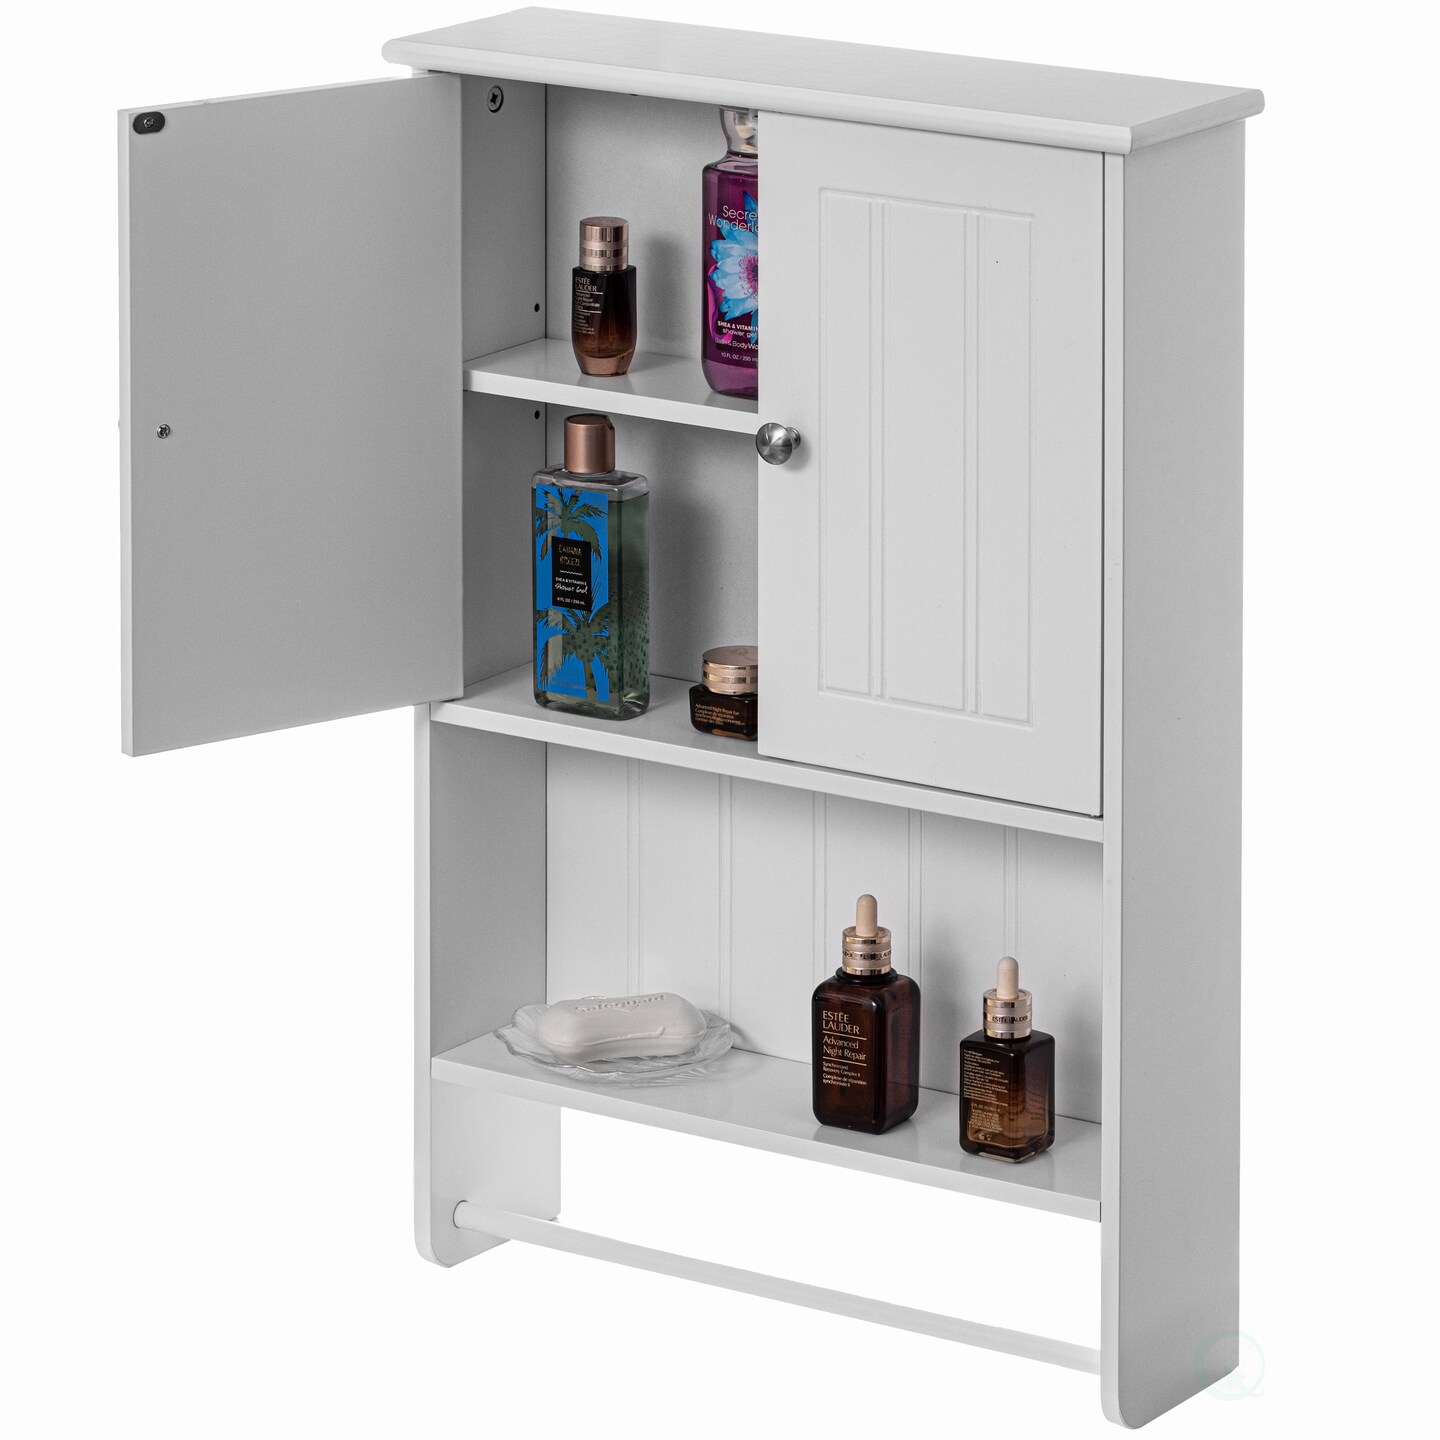 Wall-Mounted Torched Wood Paper Towel Holder with Display Shelf